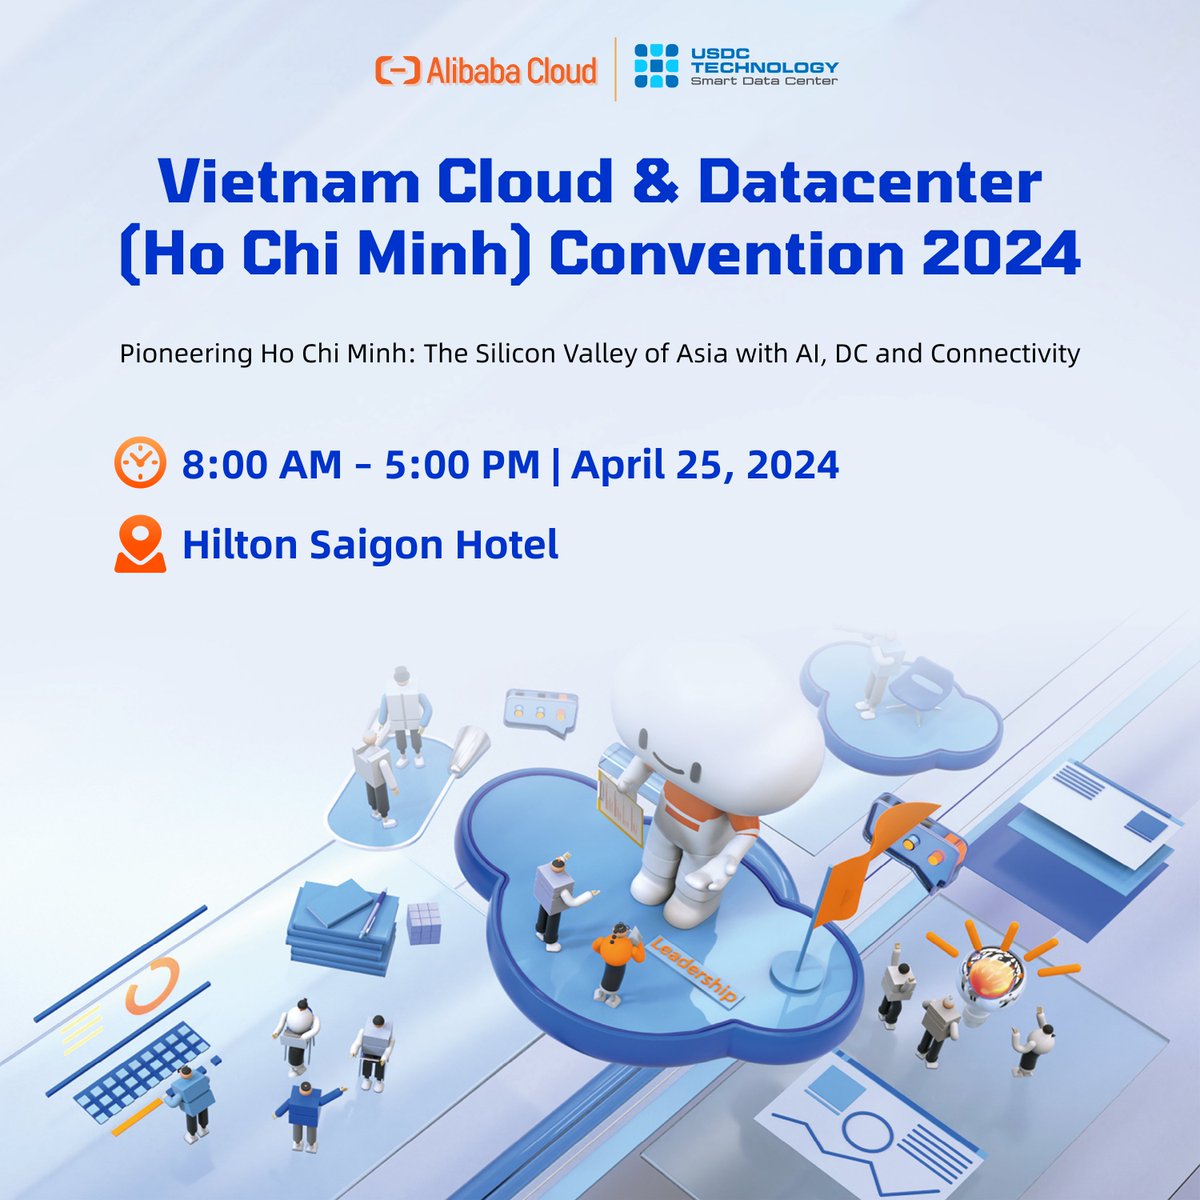 Just three days left until the Vietnam Cloud & Datacenter Convention 2024 kicks off in Ho Chi Minh City! Secure your spot today and join us for an unforgettable week of #Innovation, #Collaboration, and exploration! #AlibabaCloud can't wait to see you there!